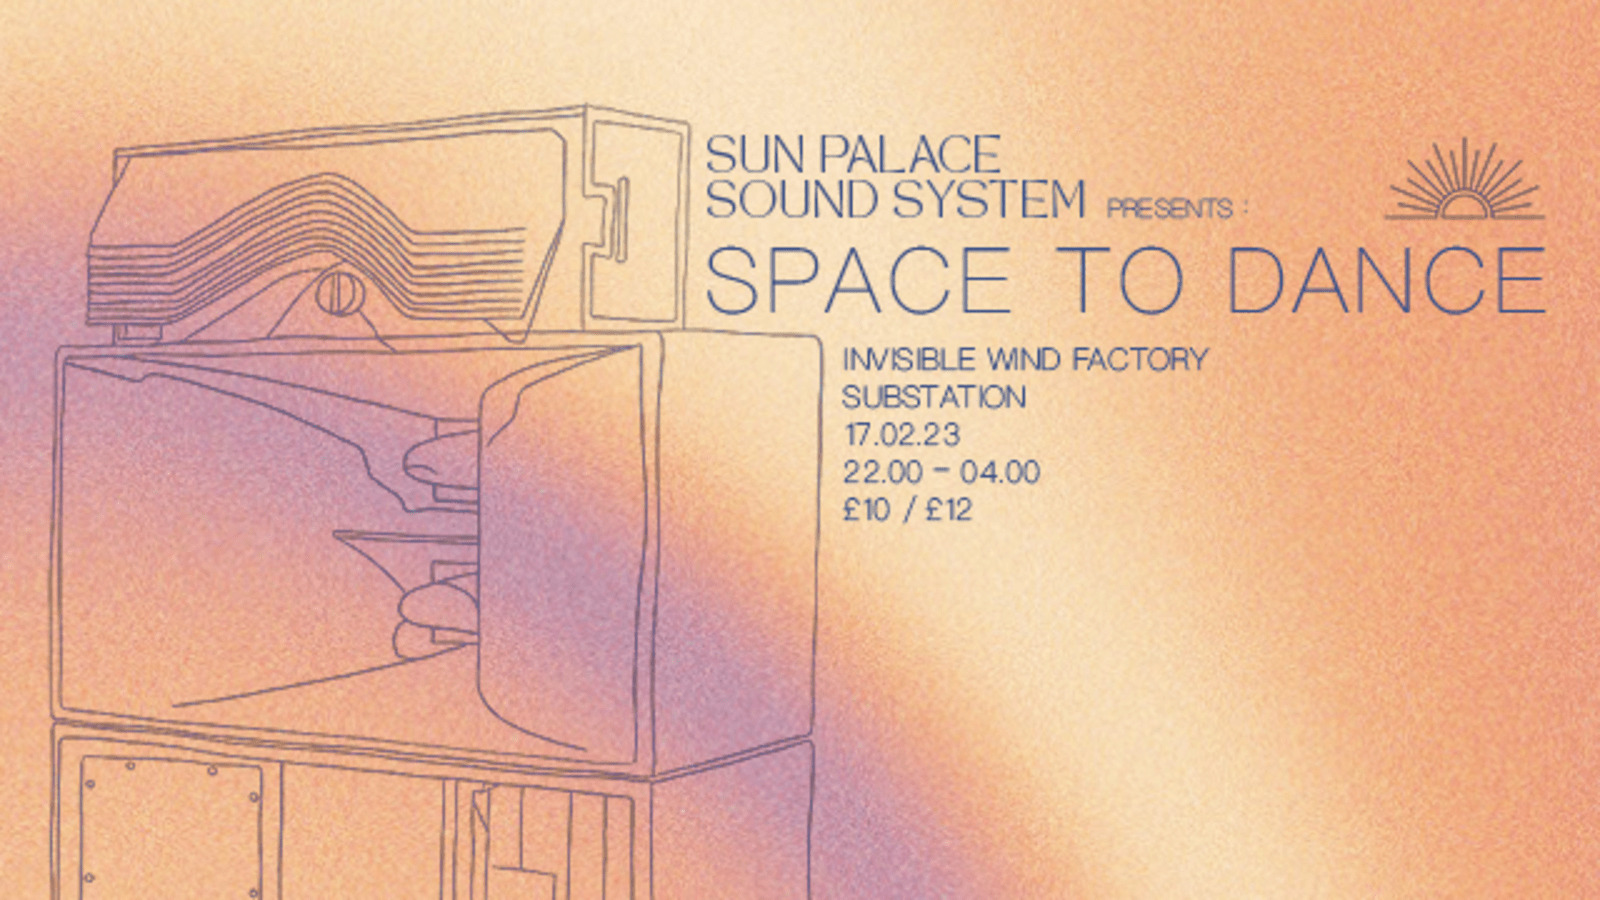 Sun Palace Sound System presents: Space to Dance